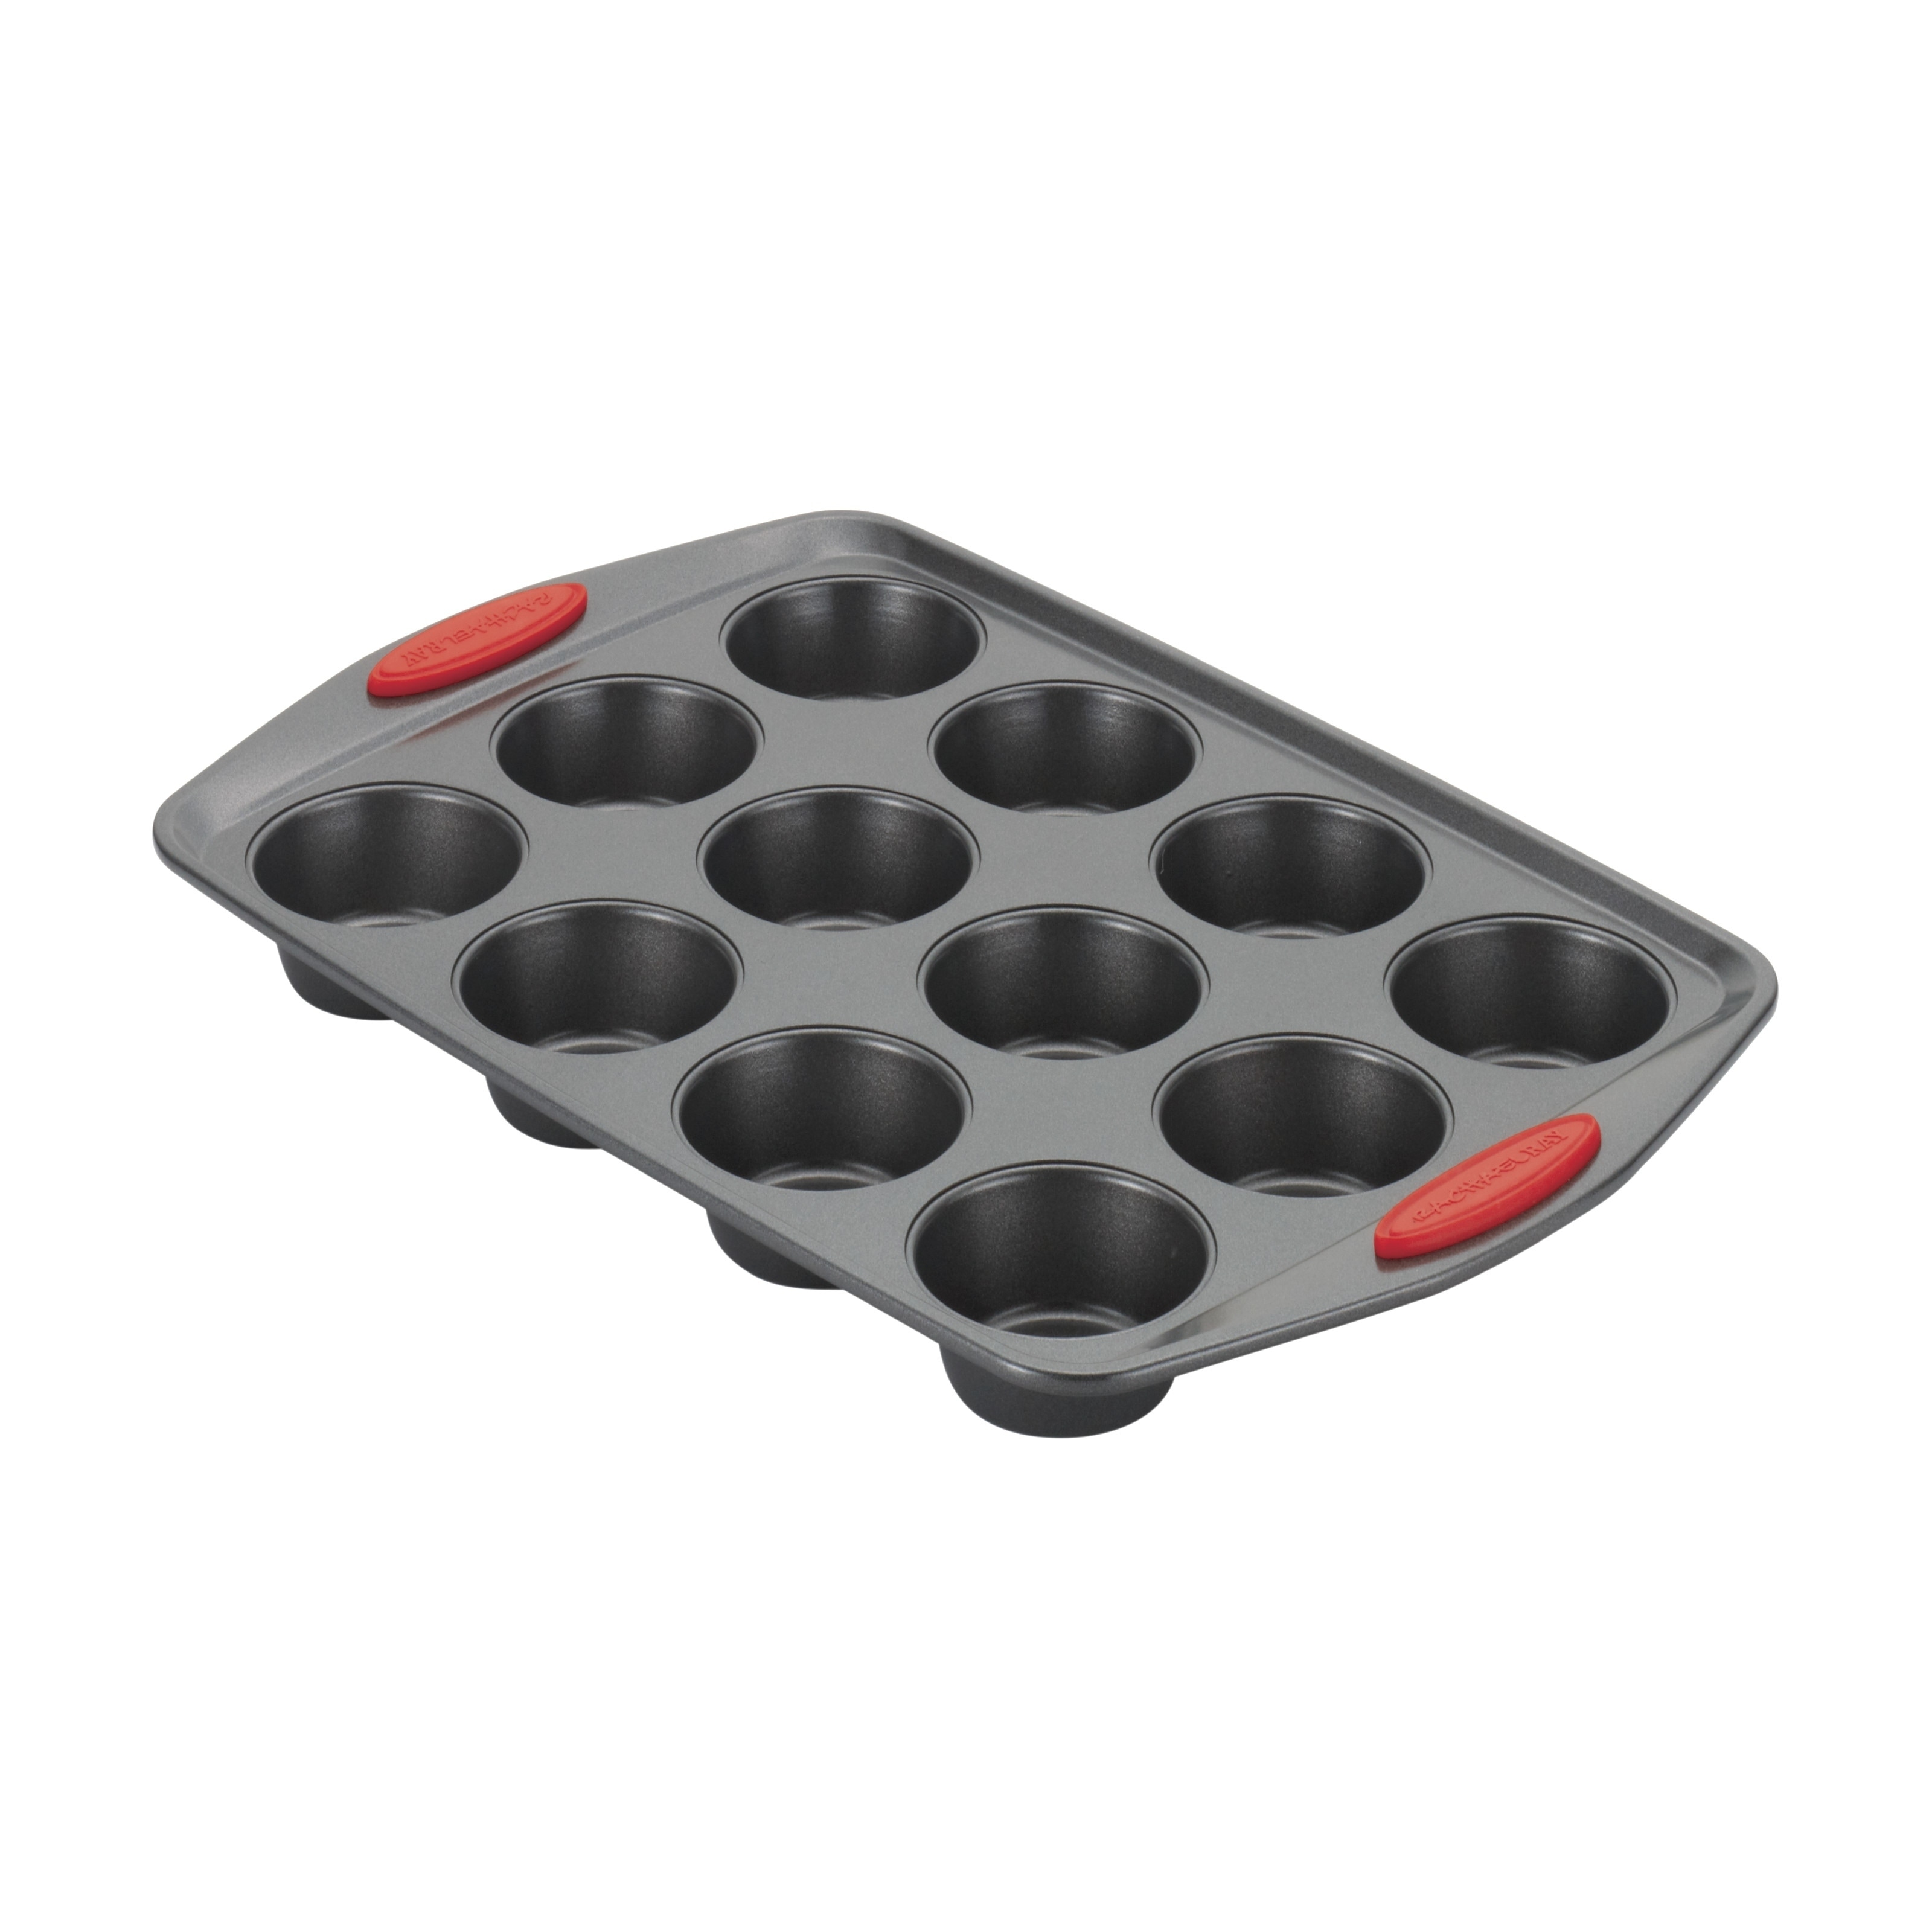 Rachael Ray Nonstick Bakeware 12-Cup Muffin and Cupcake Pan - Bed